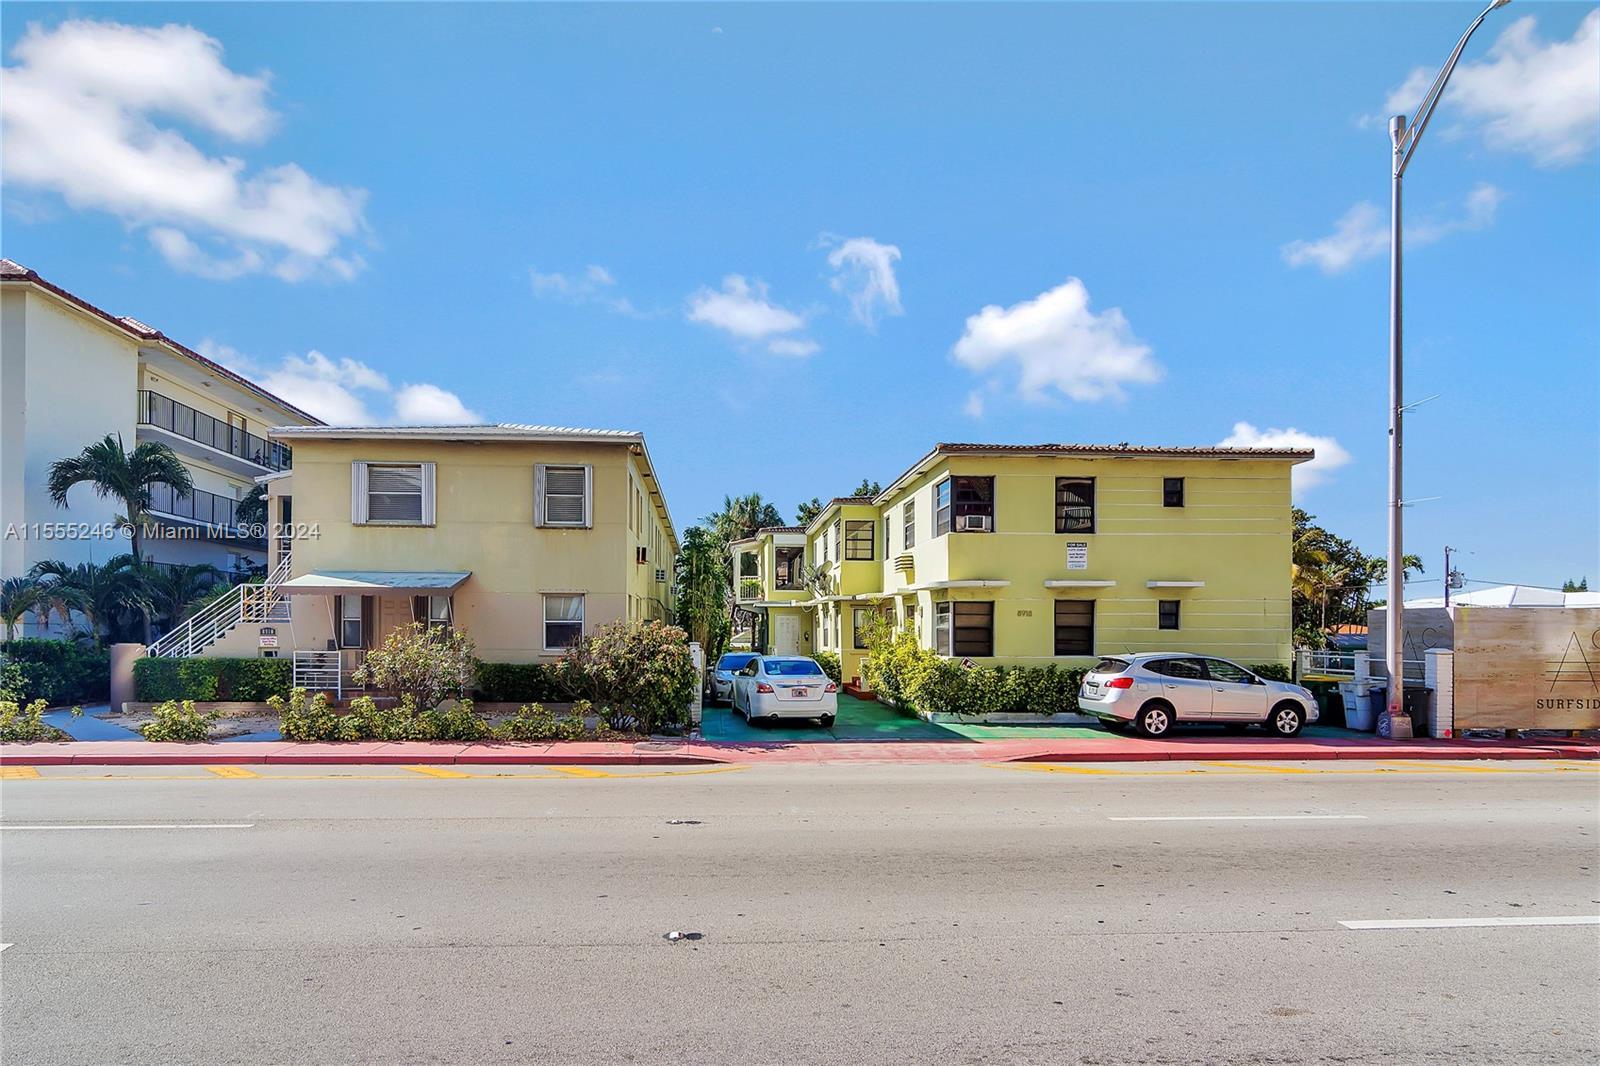 Photo of 8918 Collins Ave in Surfside, FL